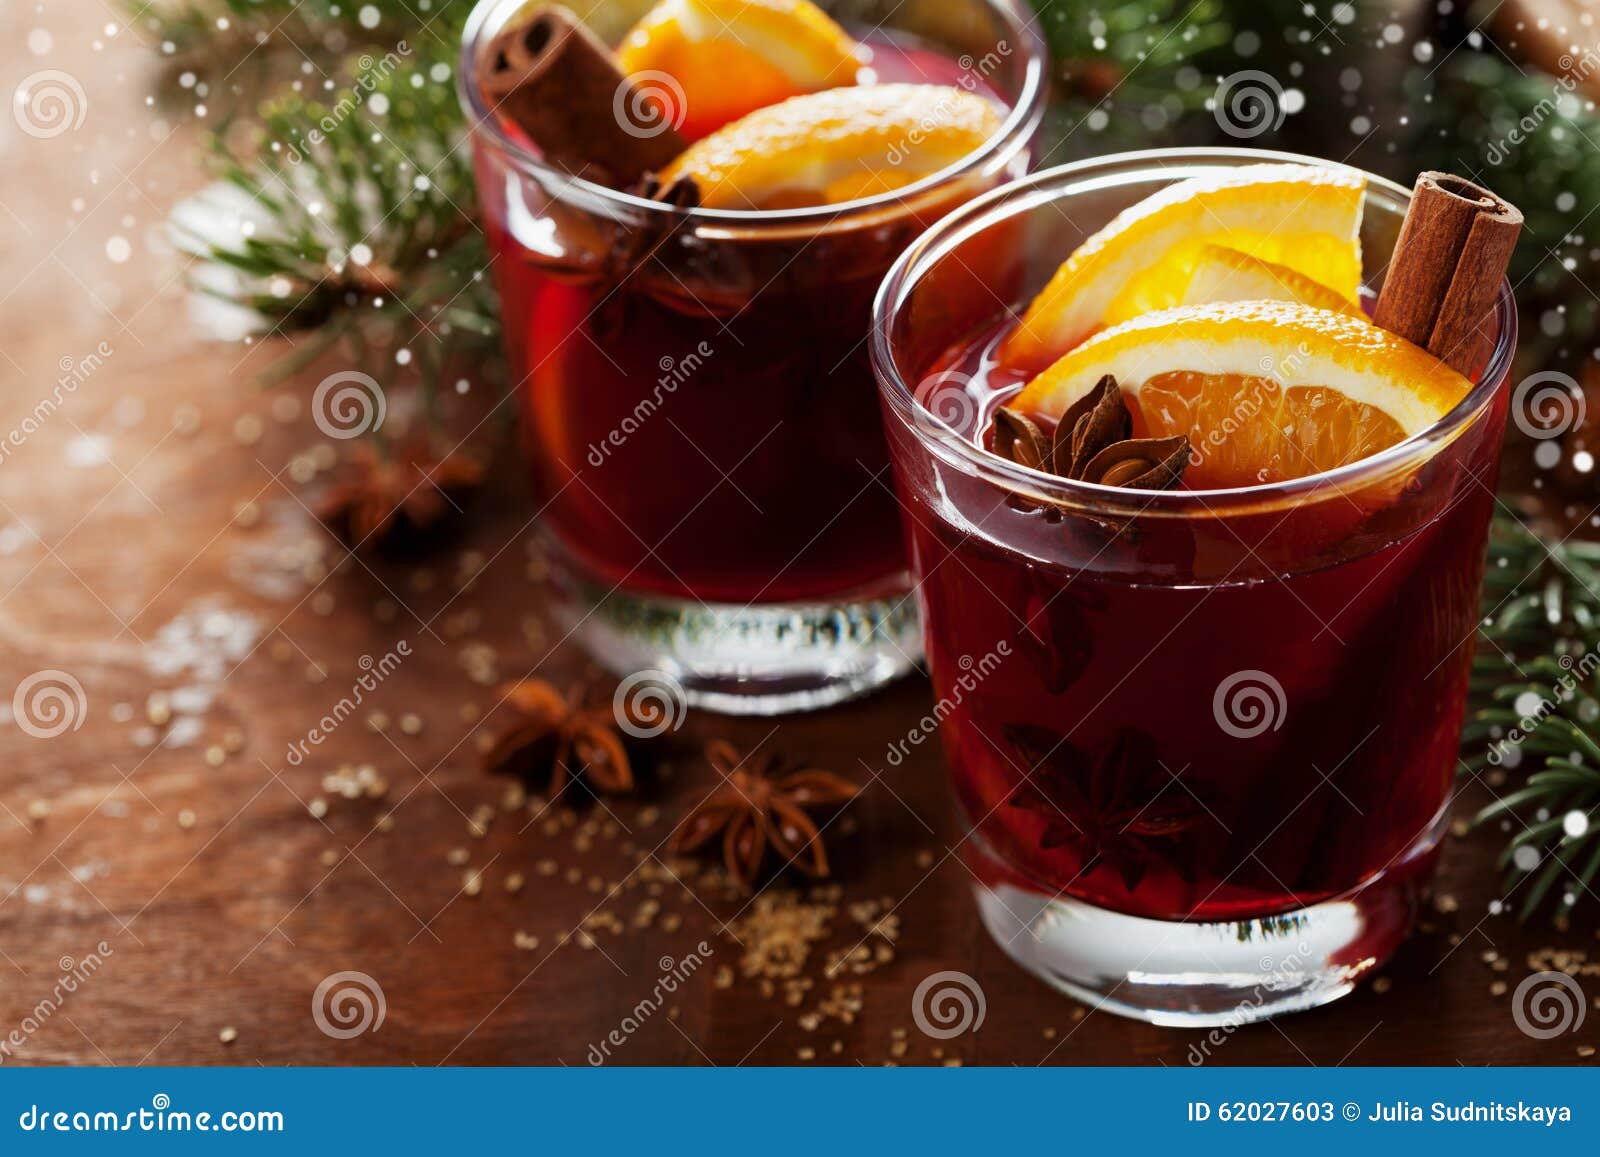 christmas mulled wine or gluhwein with spices and orange slices on rustic table, traditional drink on winter holiday, magic light